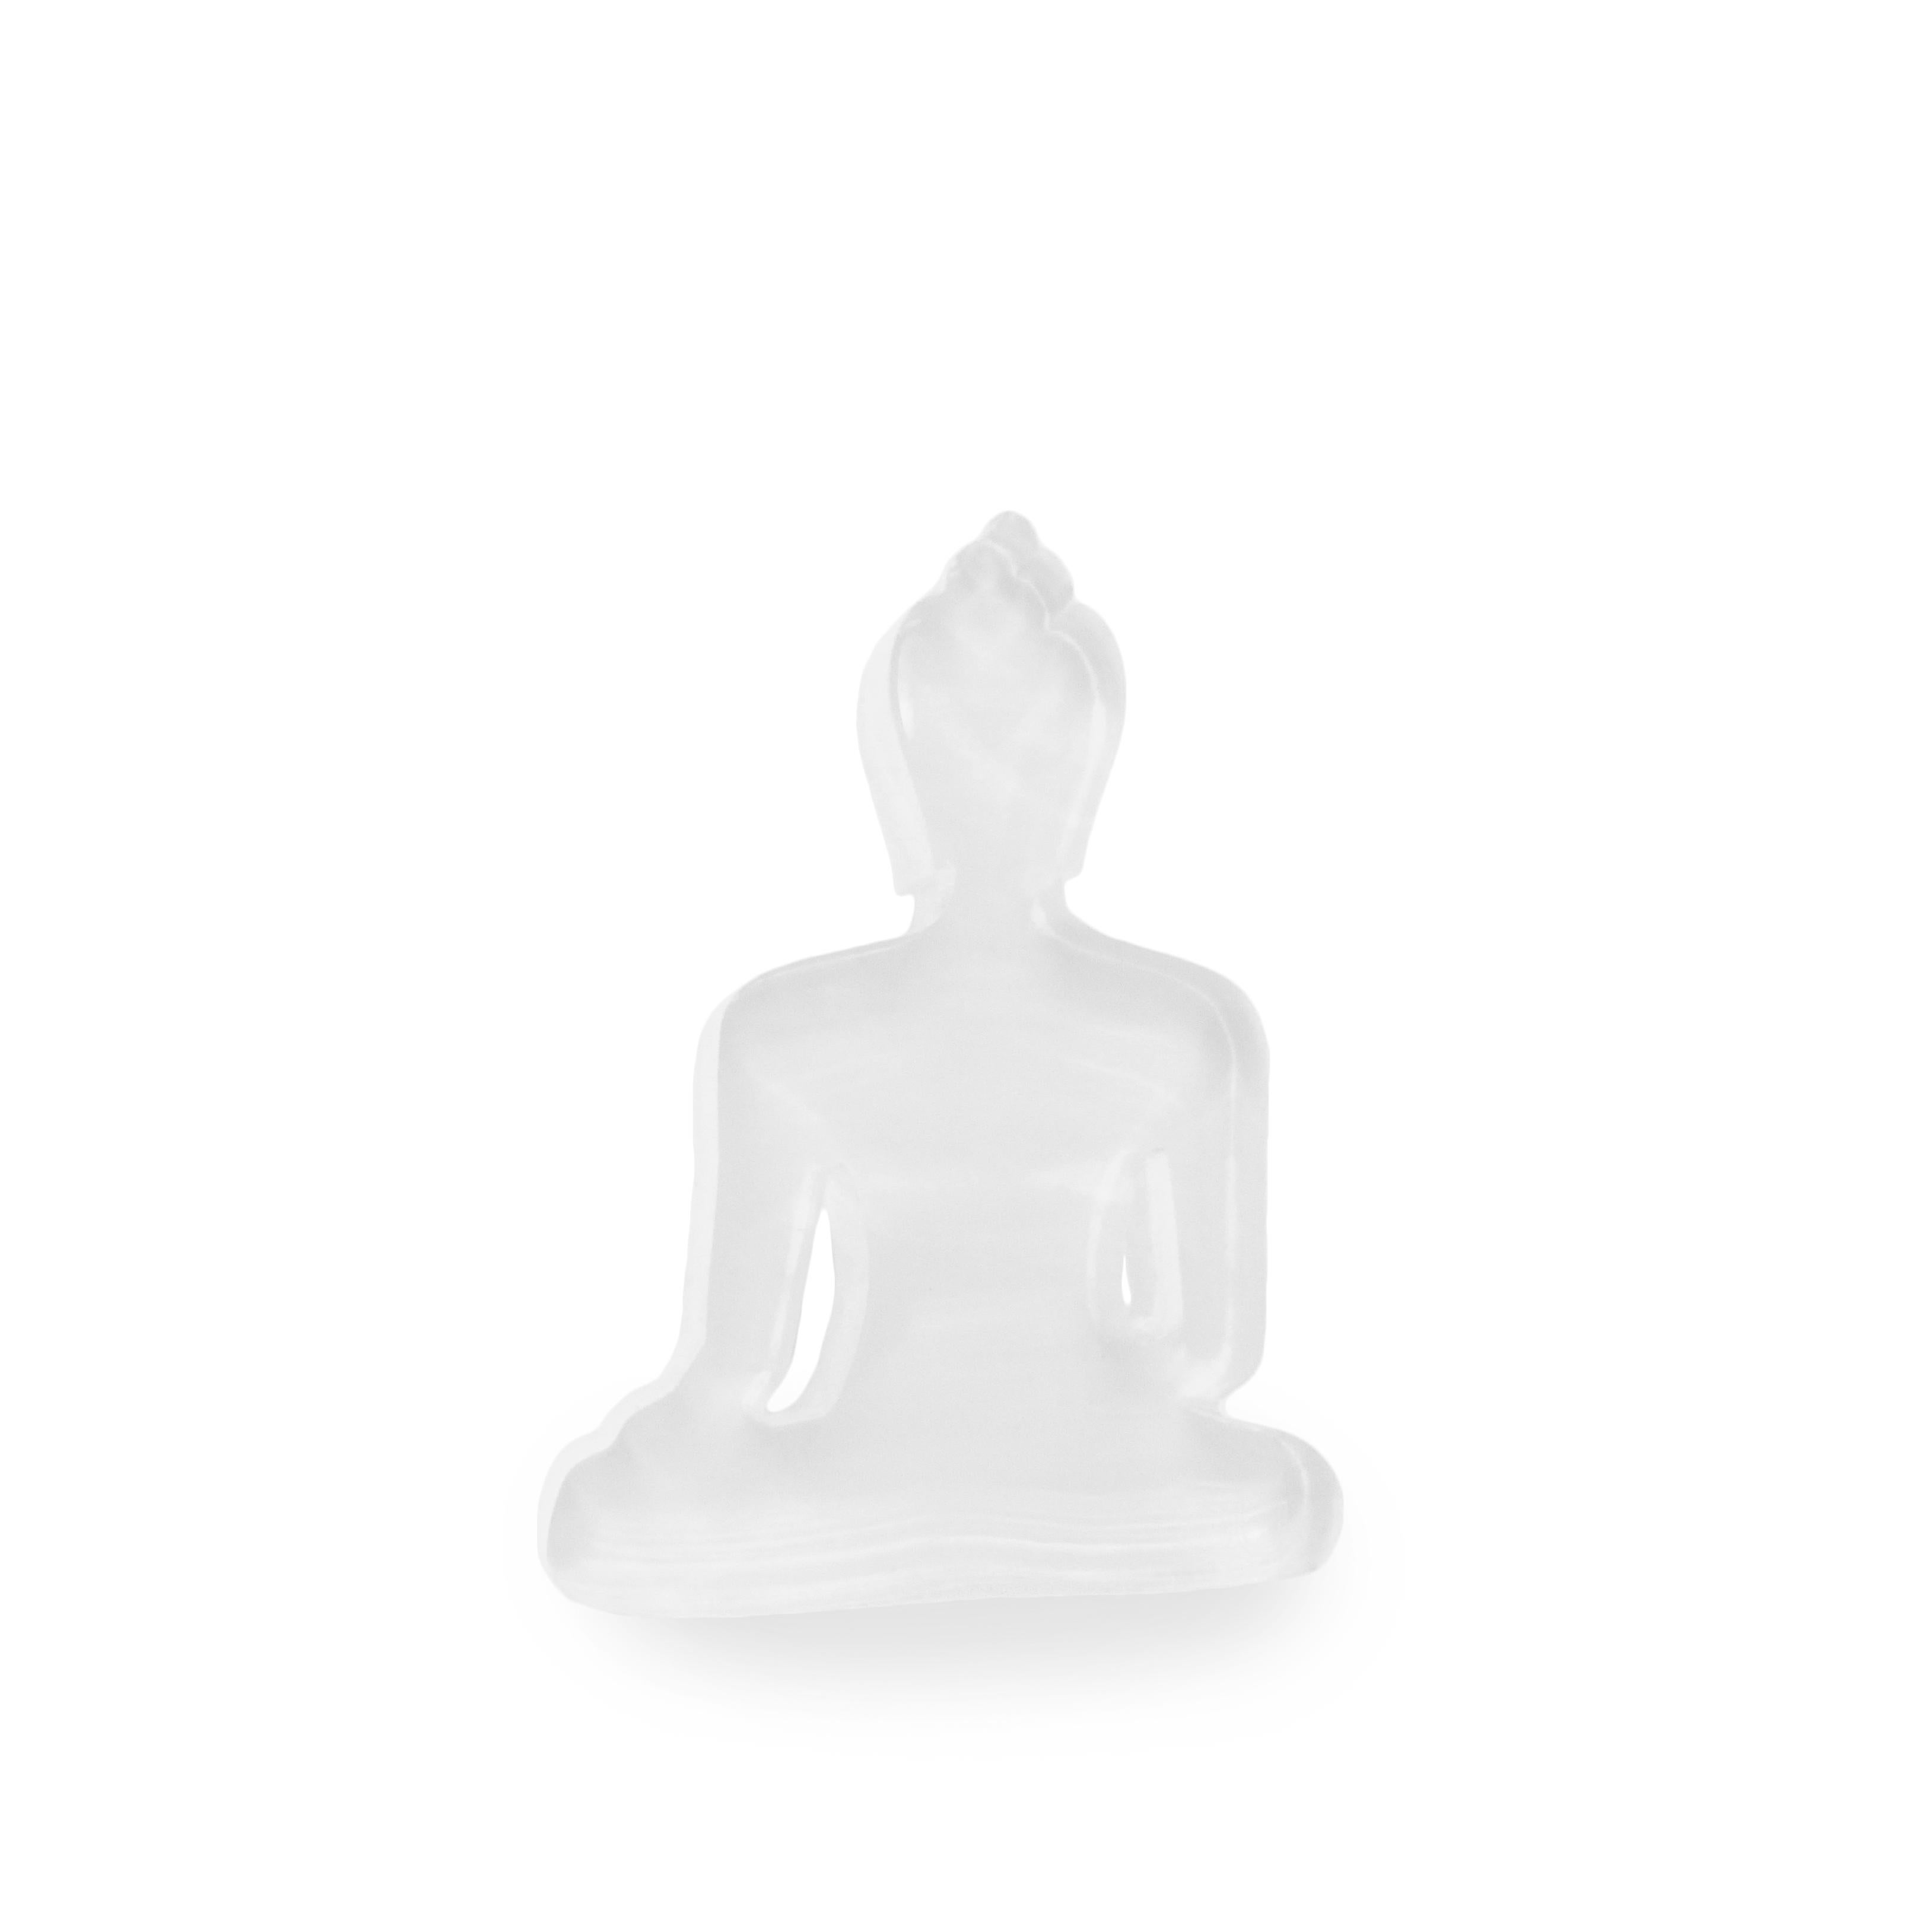 Buddha statue Duo (White and turquoise Buddhas sculpture) - Contemporary Sculpture by Tal Nehoray